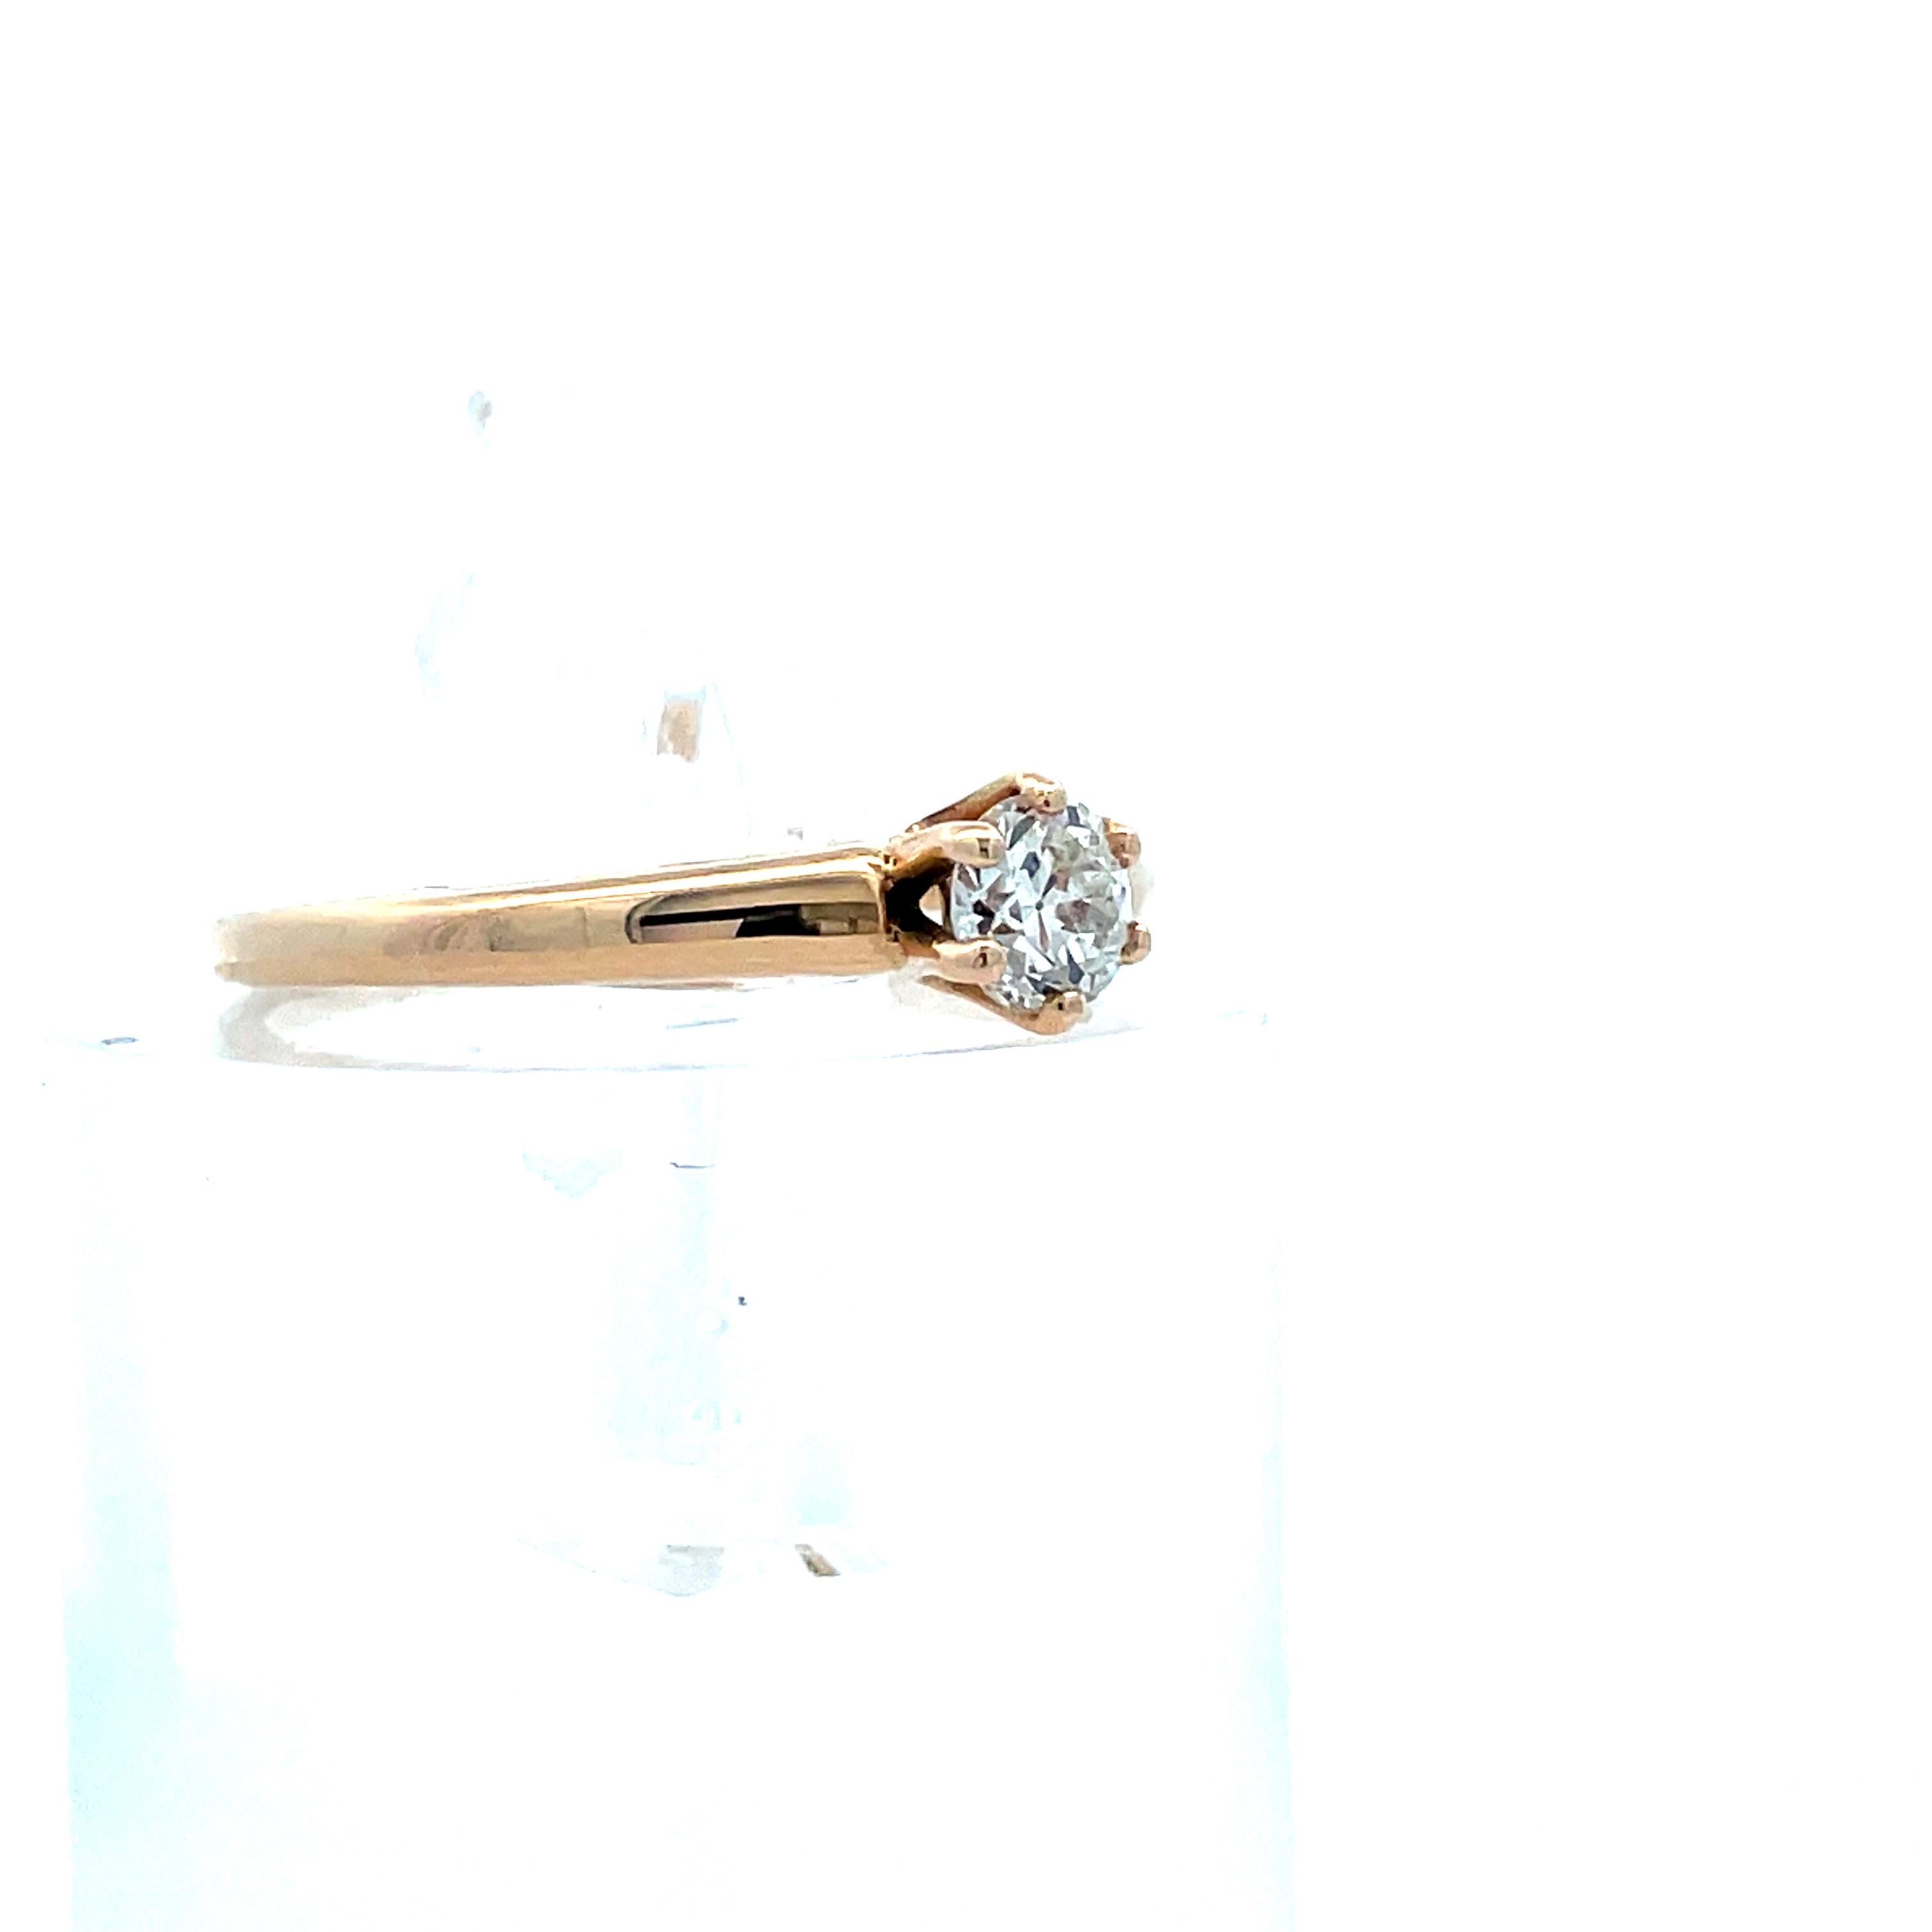 - 14k Yellow Gold 
- .30 Round Cut Si Clarity Diamond 
- Size 6.75 
- 1910 Edwardian 
- Signed Marshall Field 

This is a beautiful Edwardian solitaire diamond ring from 1910, made in 14k yellow gold, signed Marshall field. The stunning .30 ct